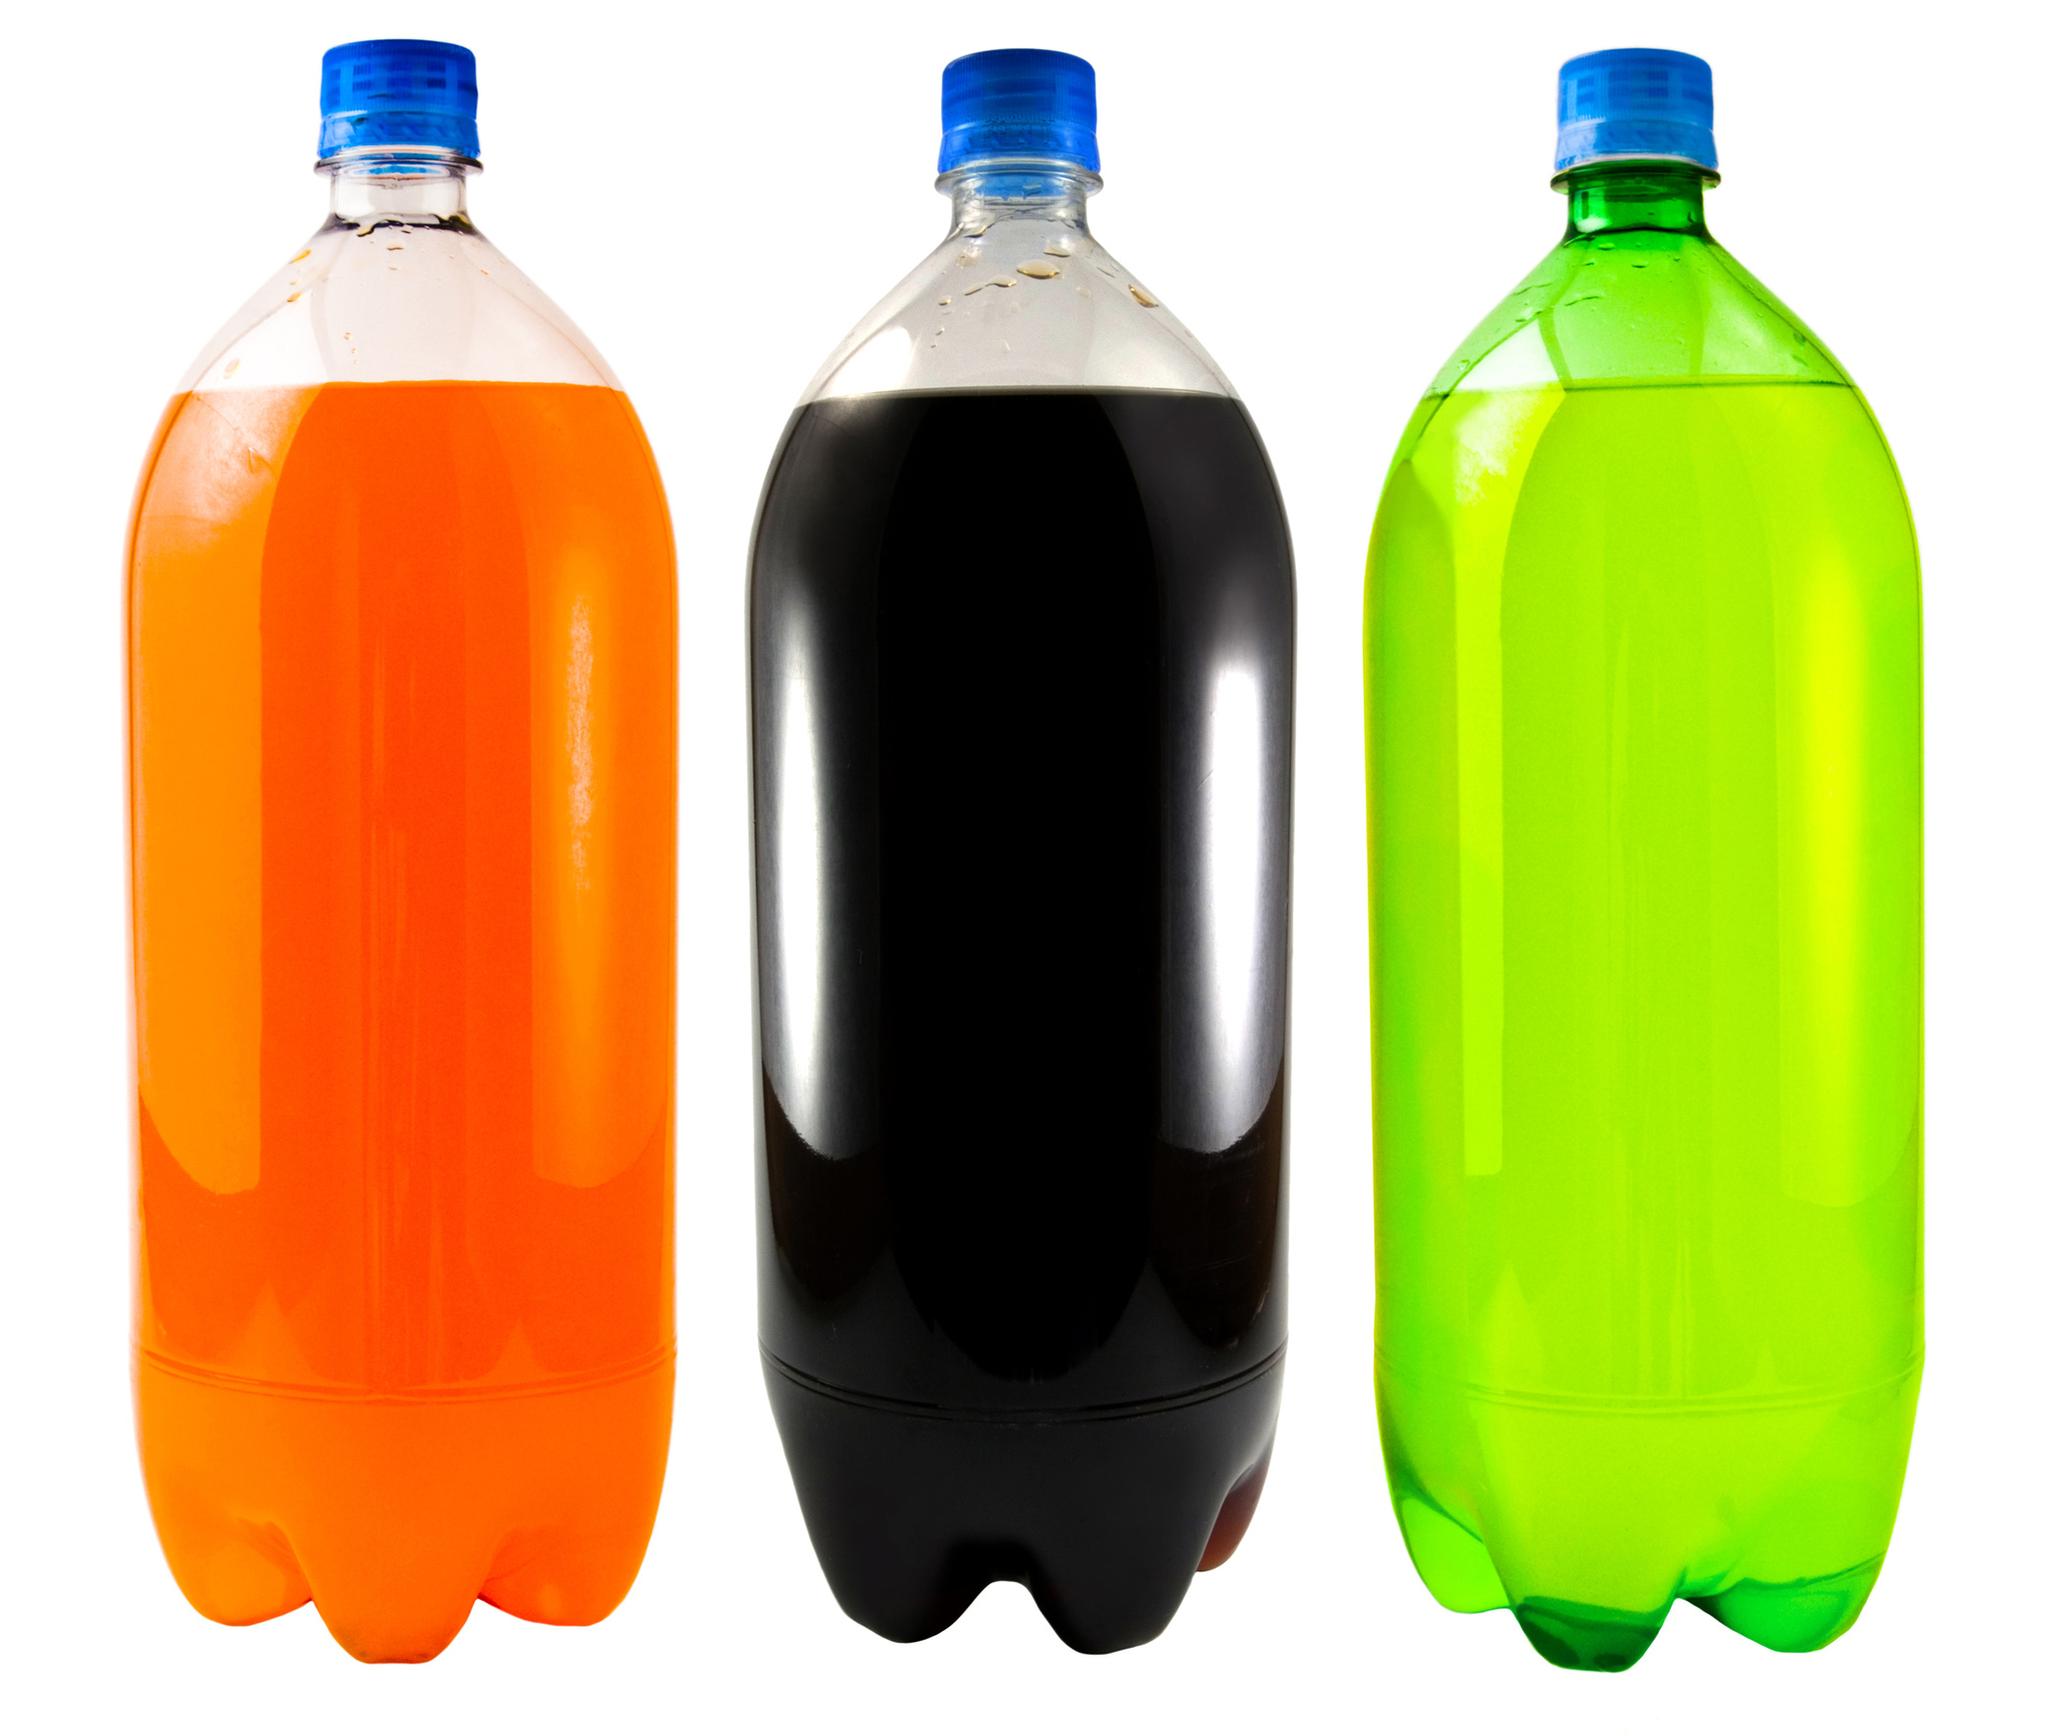 Close Up On Three Soda Bottles Isolated On A White Background    The